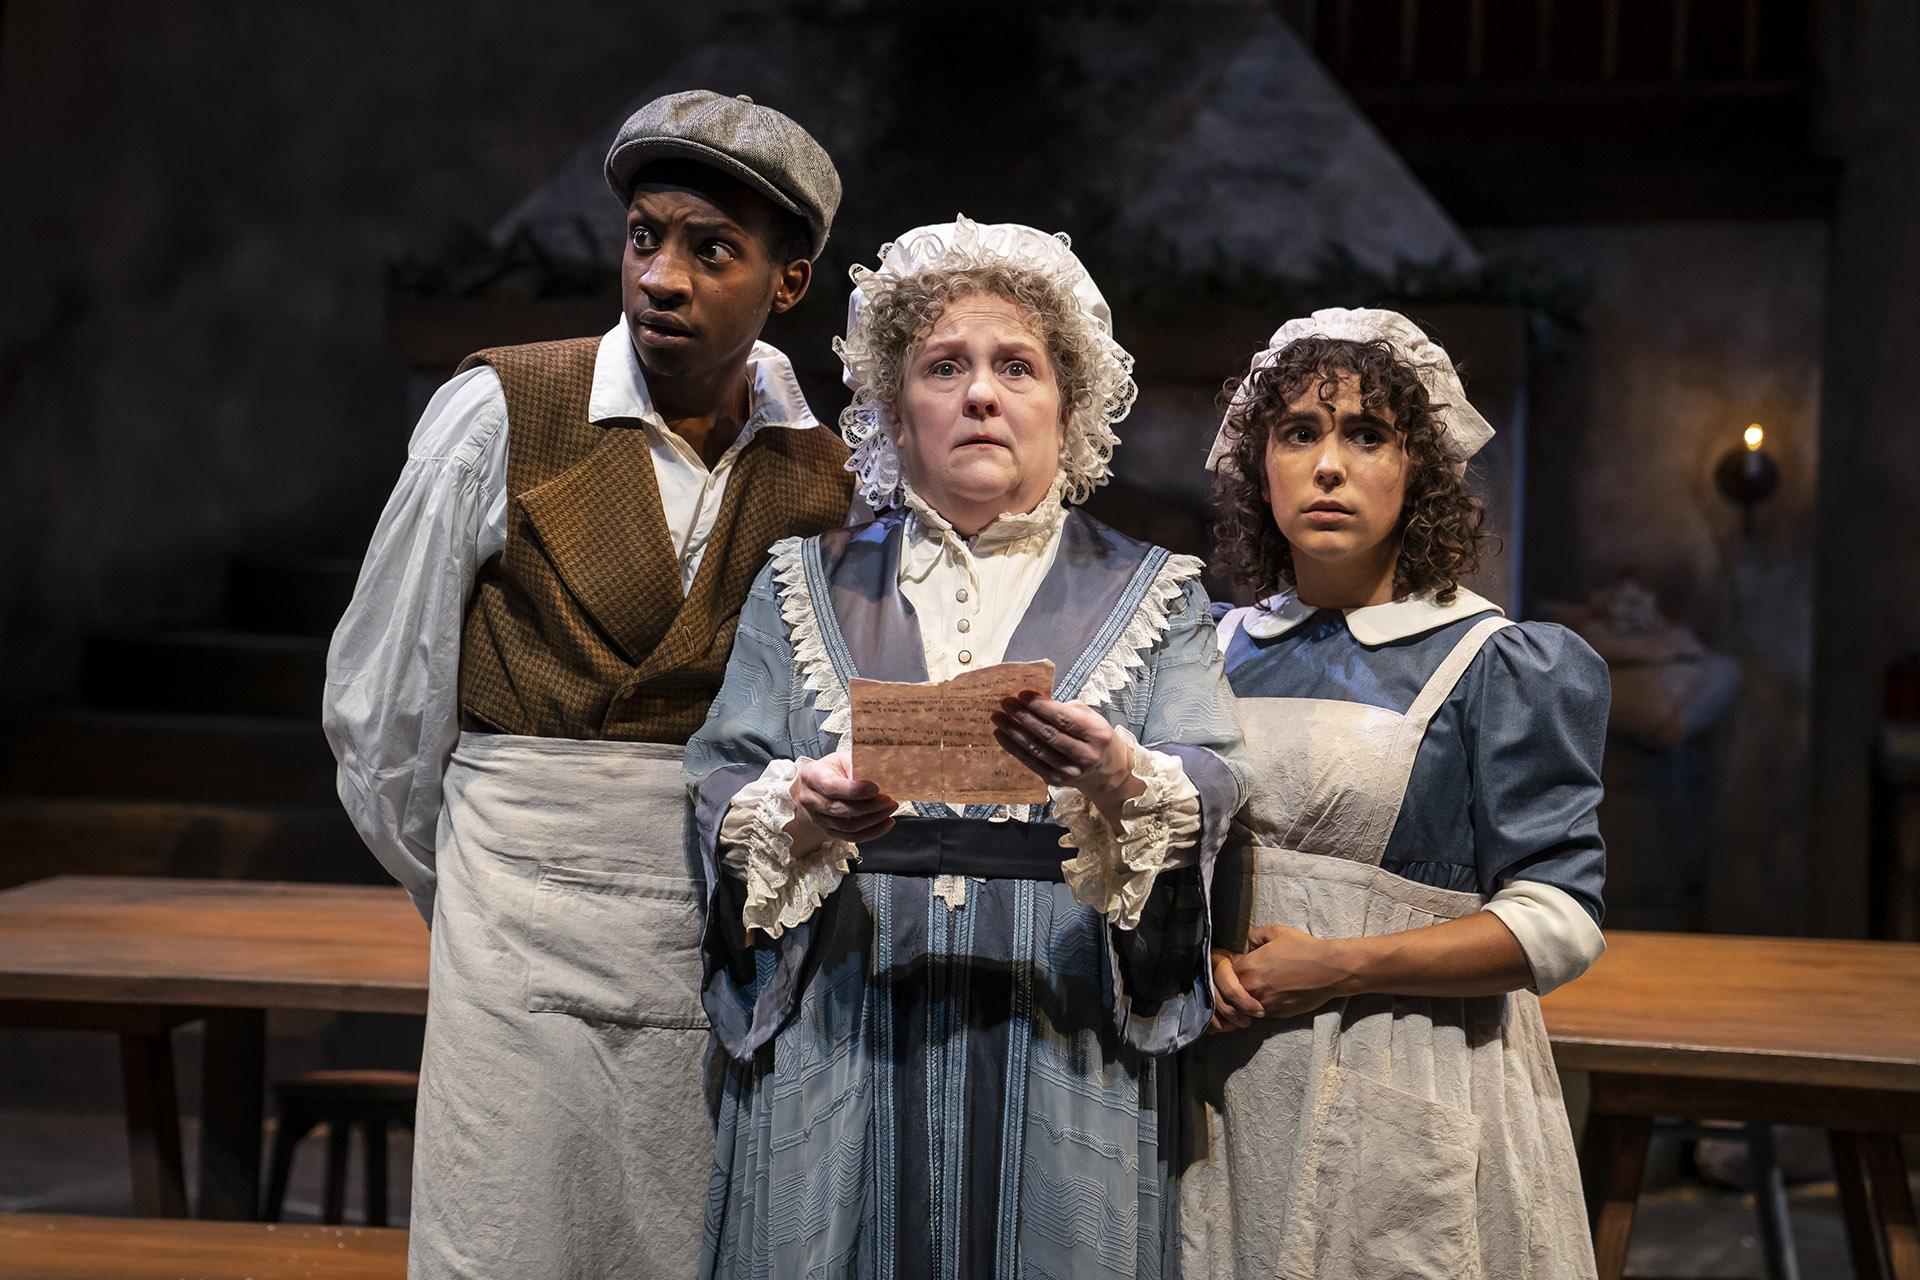 Jayson Lee (left to right), Penny Slusher and Aurora Real de Asua in “The Wickhams: Christmas at Pemberley.” (Photo by Liz Lauren)